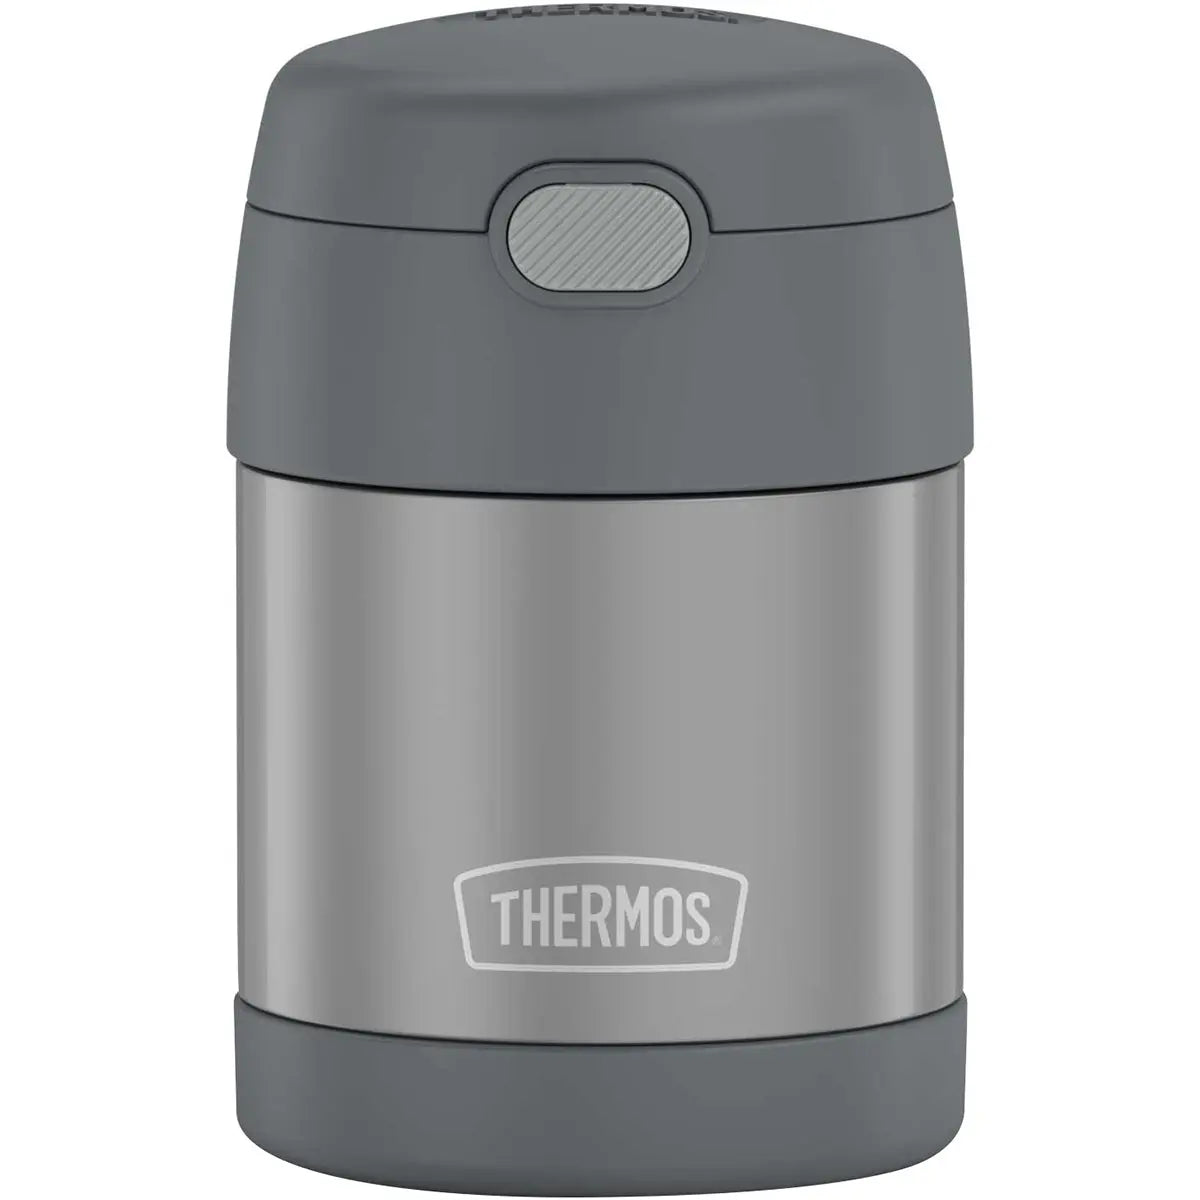 Thermos 10 oz. Kid's Funtainer Vacuum Insulated Stainless Steel Food Jar Thermos